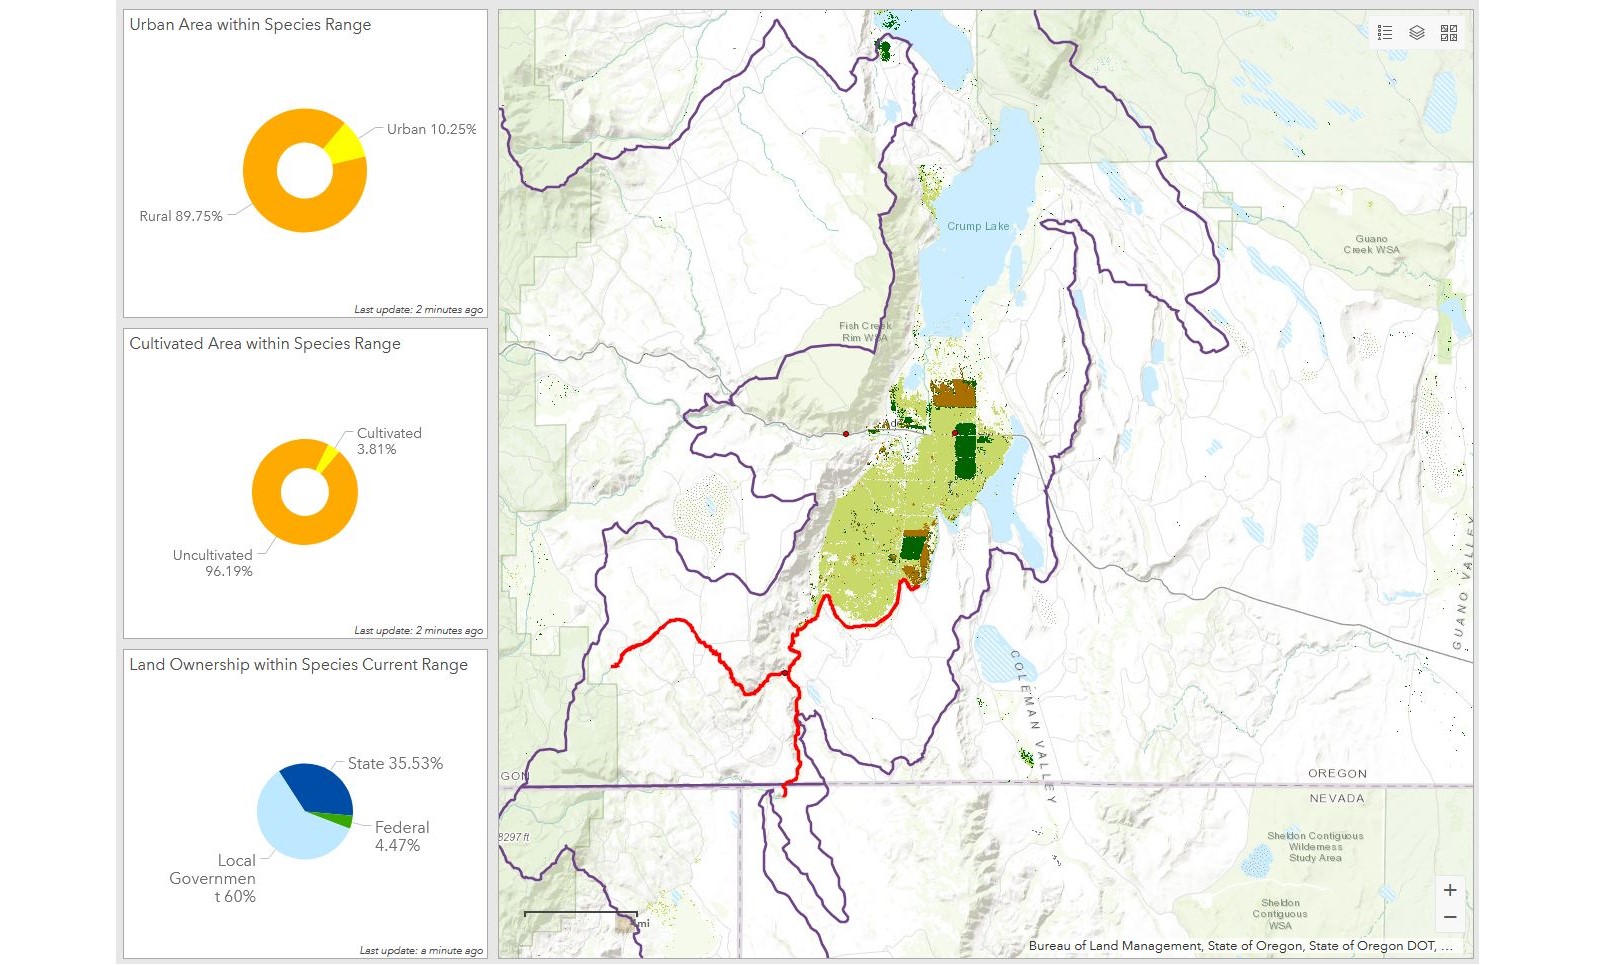 Arcgis Online Tools Help Visualize Impact On Species Applied Analysis Solutions